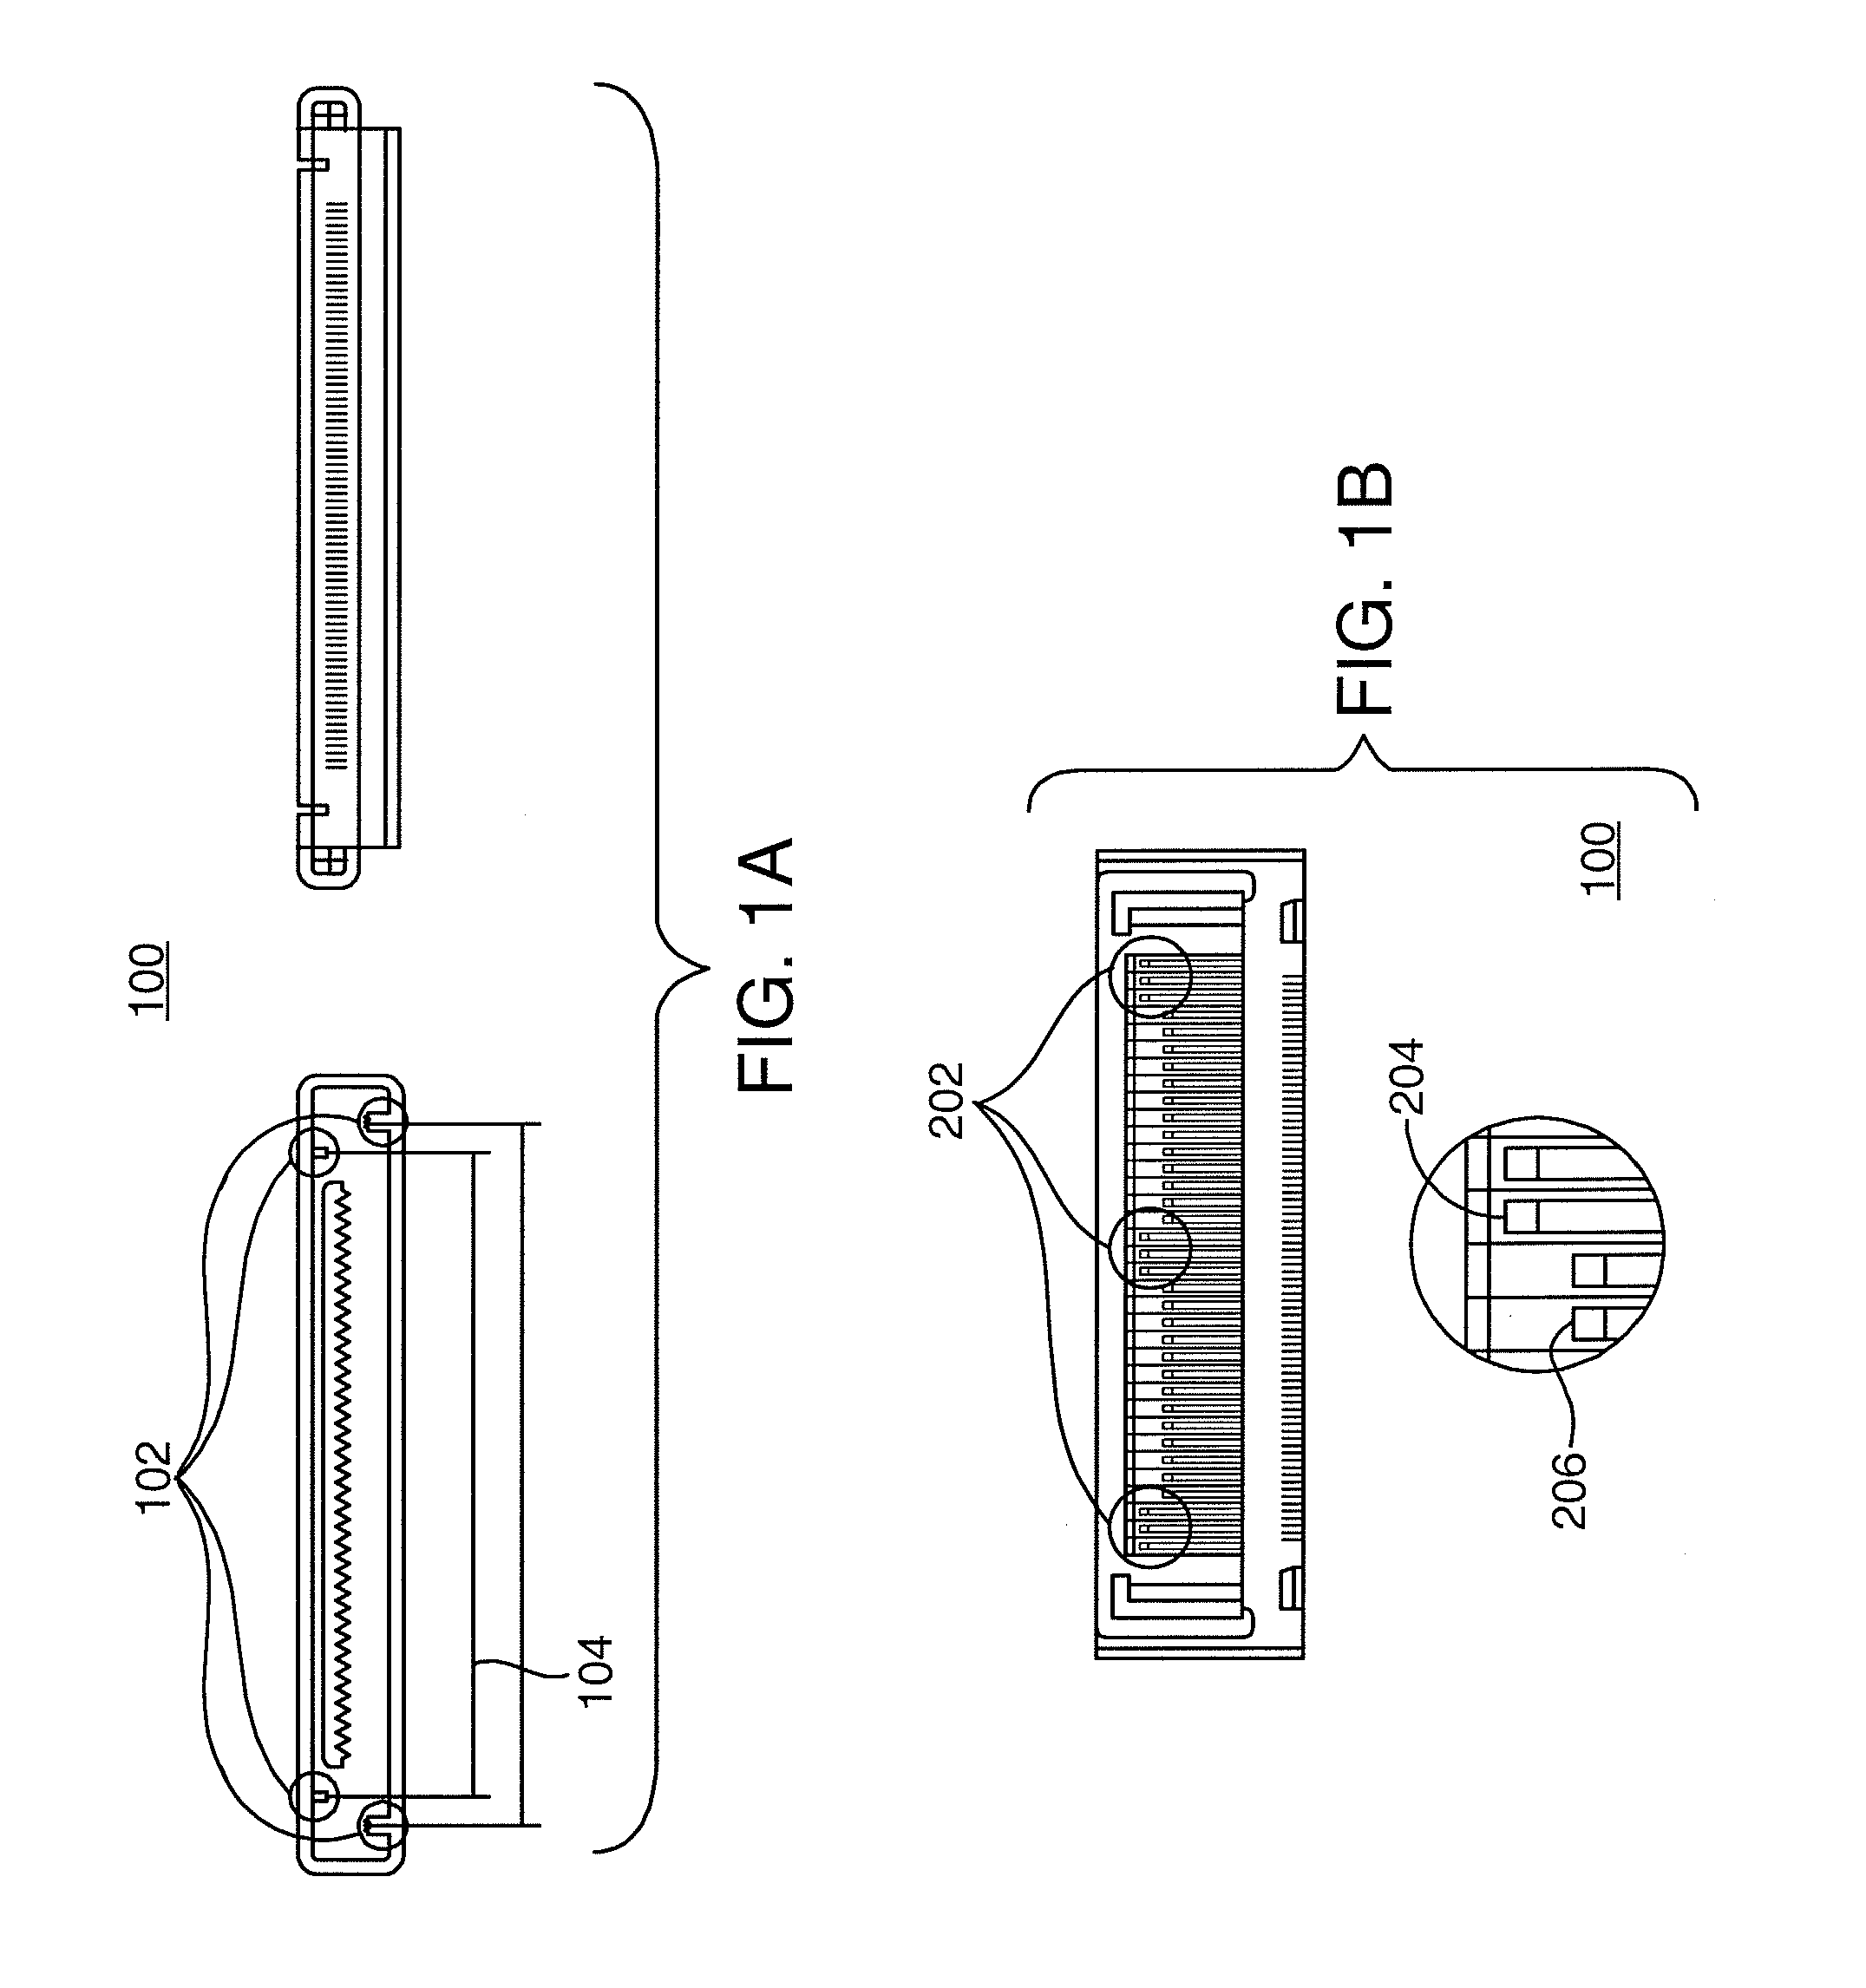 Communication between an accessory and a media player with multiple protocol versions